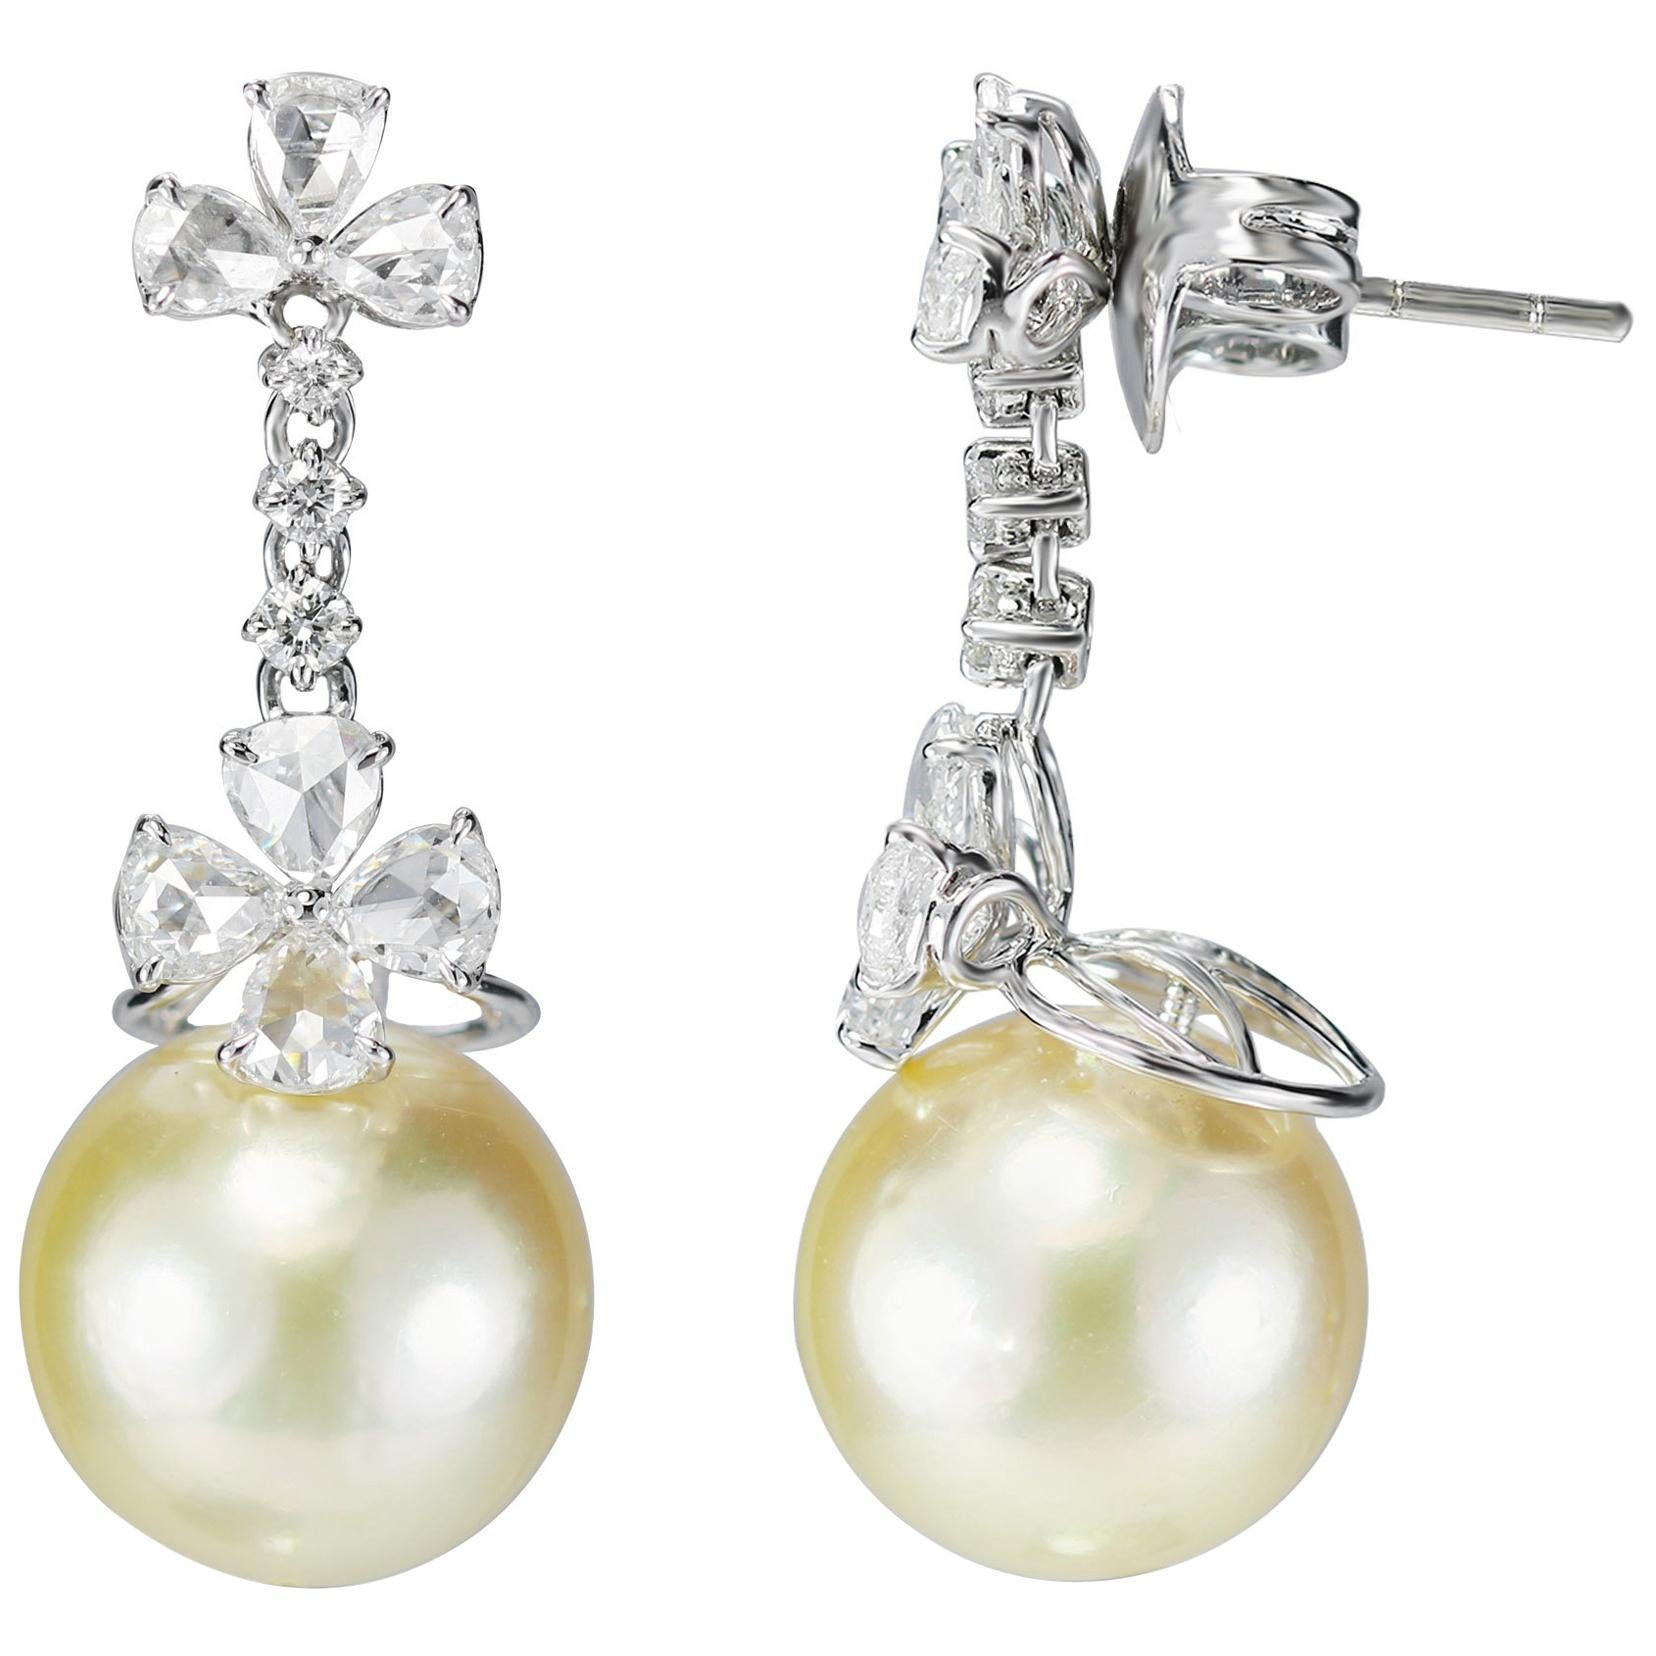 Studio Rêves Pear Rose Cut Diamonds and South Sea Pearl Earrings in 18K Gold For Sale